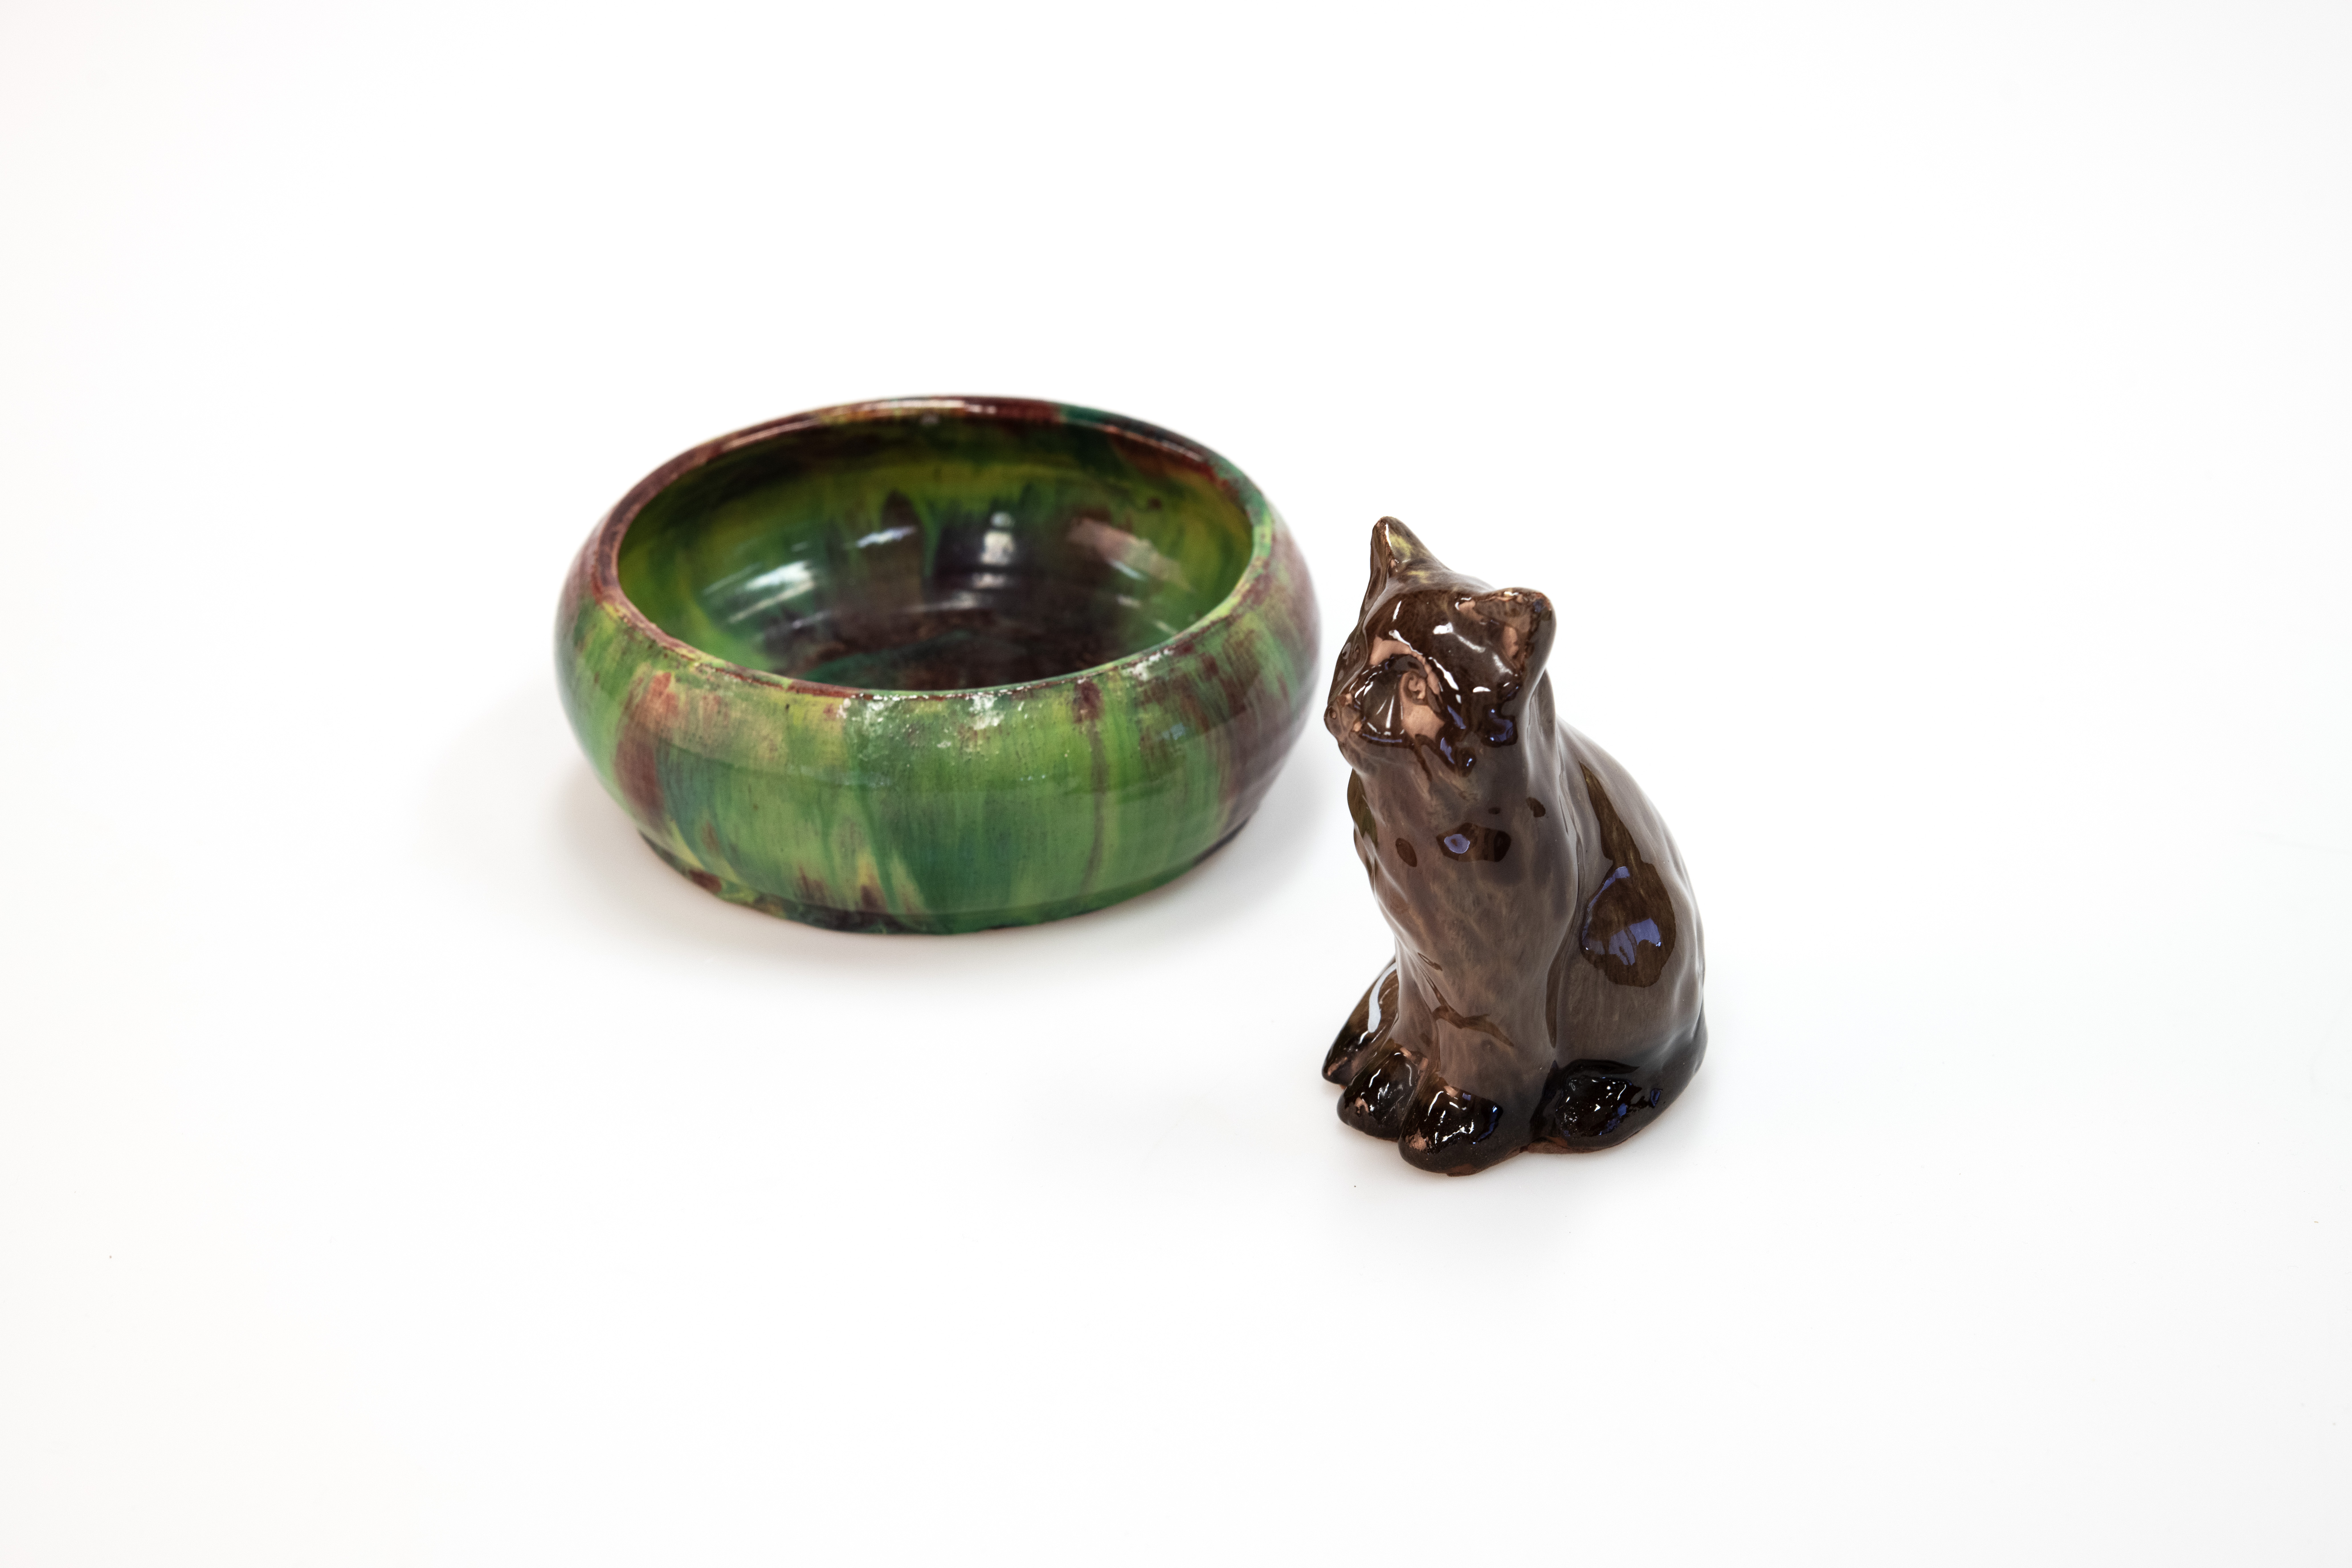 Image of a hand made ceramic cat and bowl.